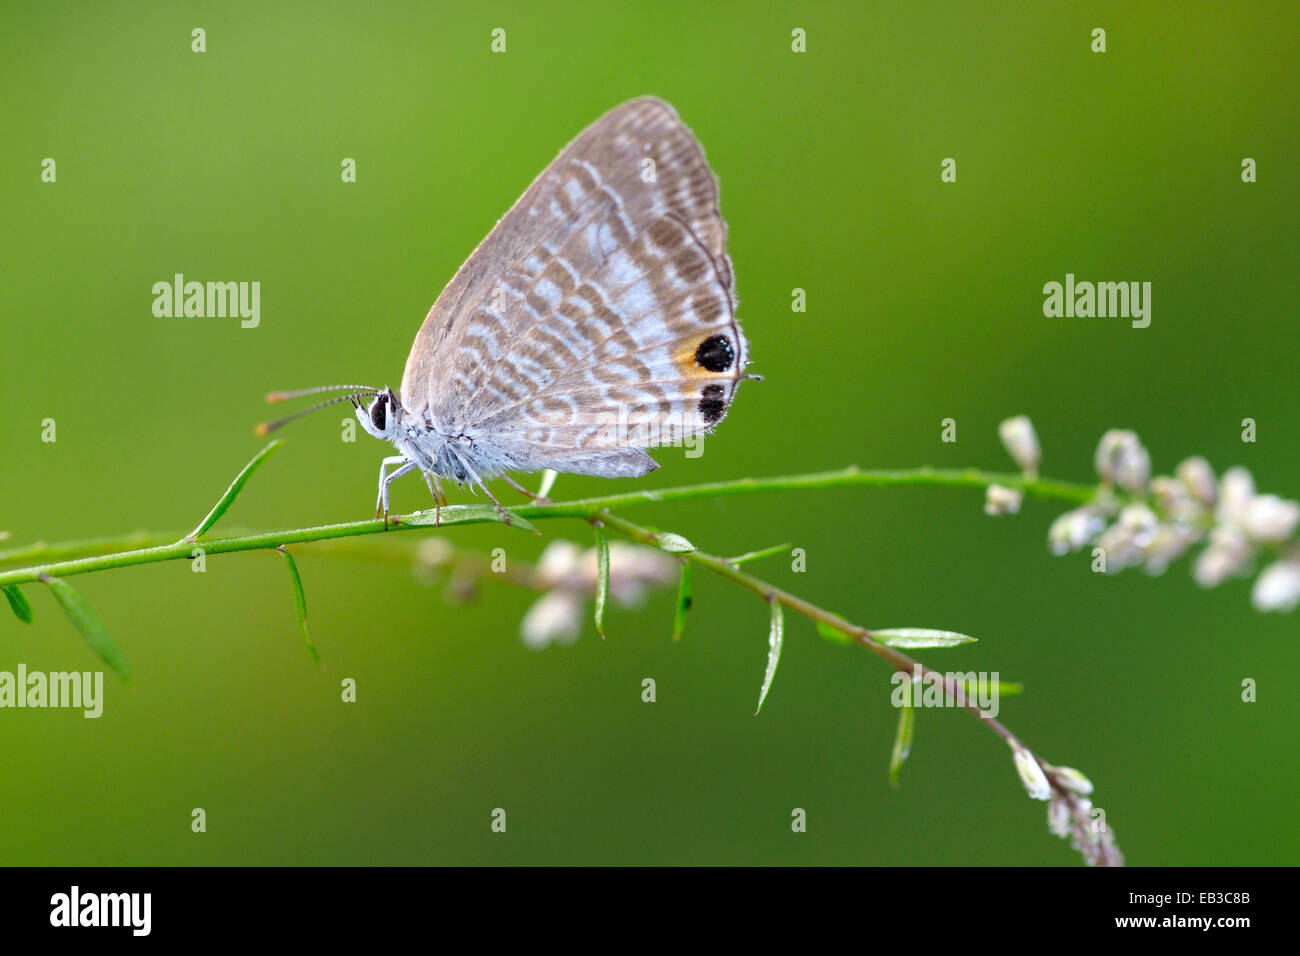 Indonesia, West Java, Bandung, Butterfly Foto Stock